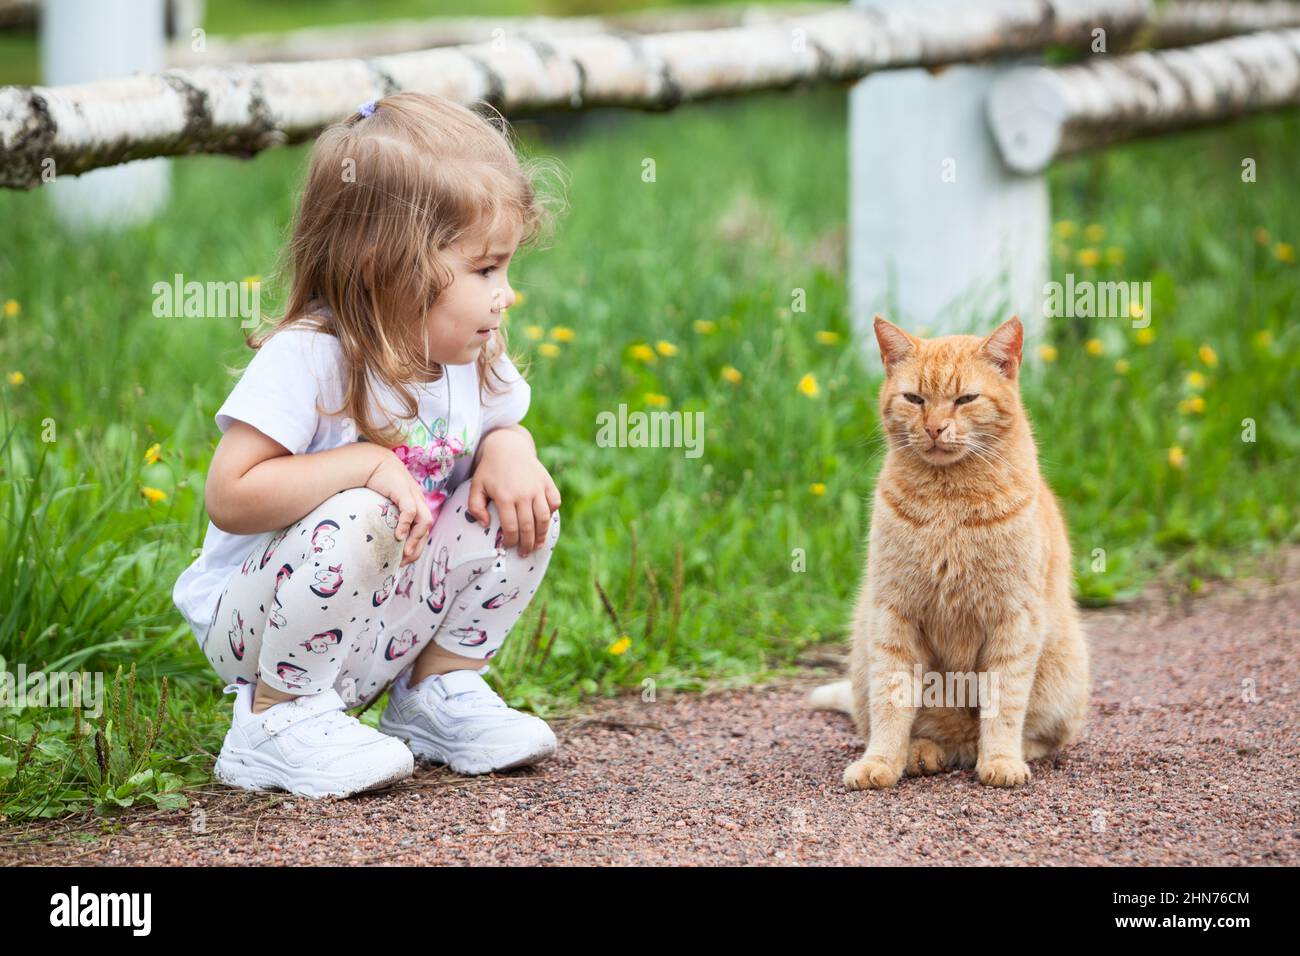 Little Caucasian girl sitting on pathway with red cat, kid and pet Stock Photo